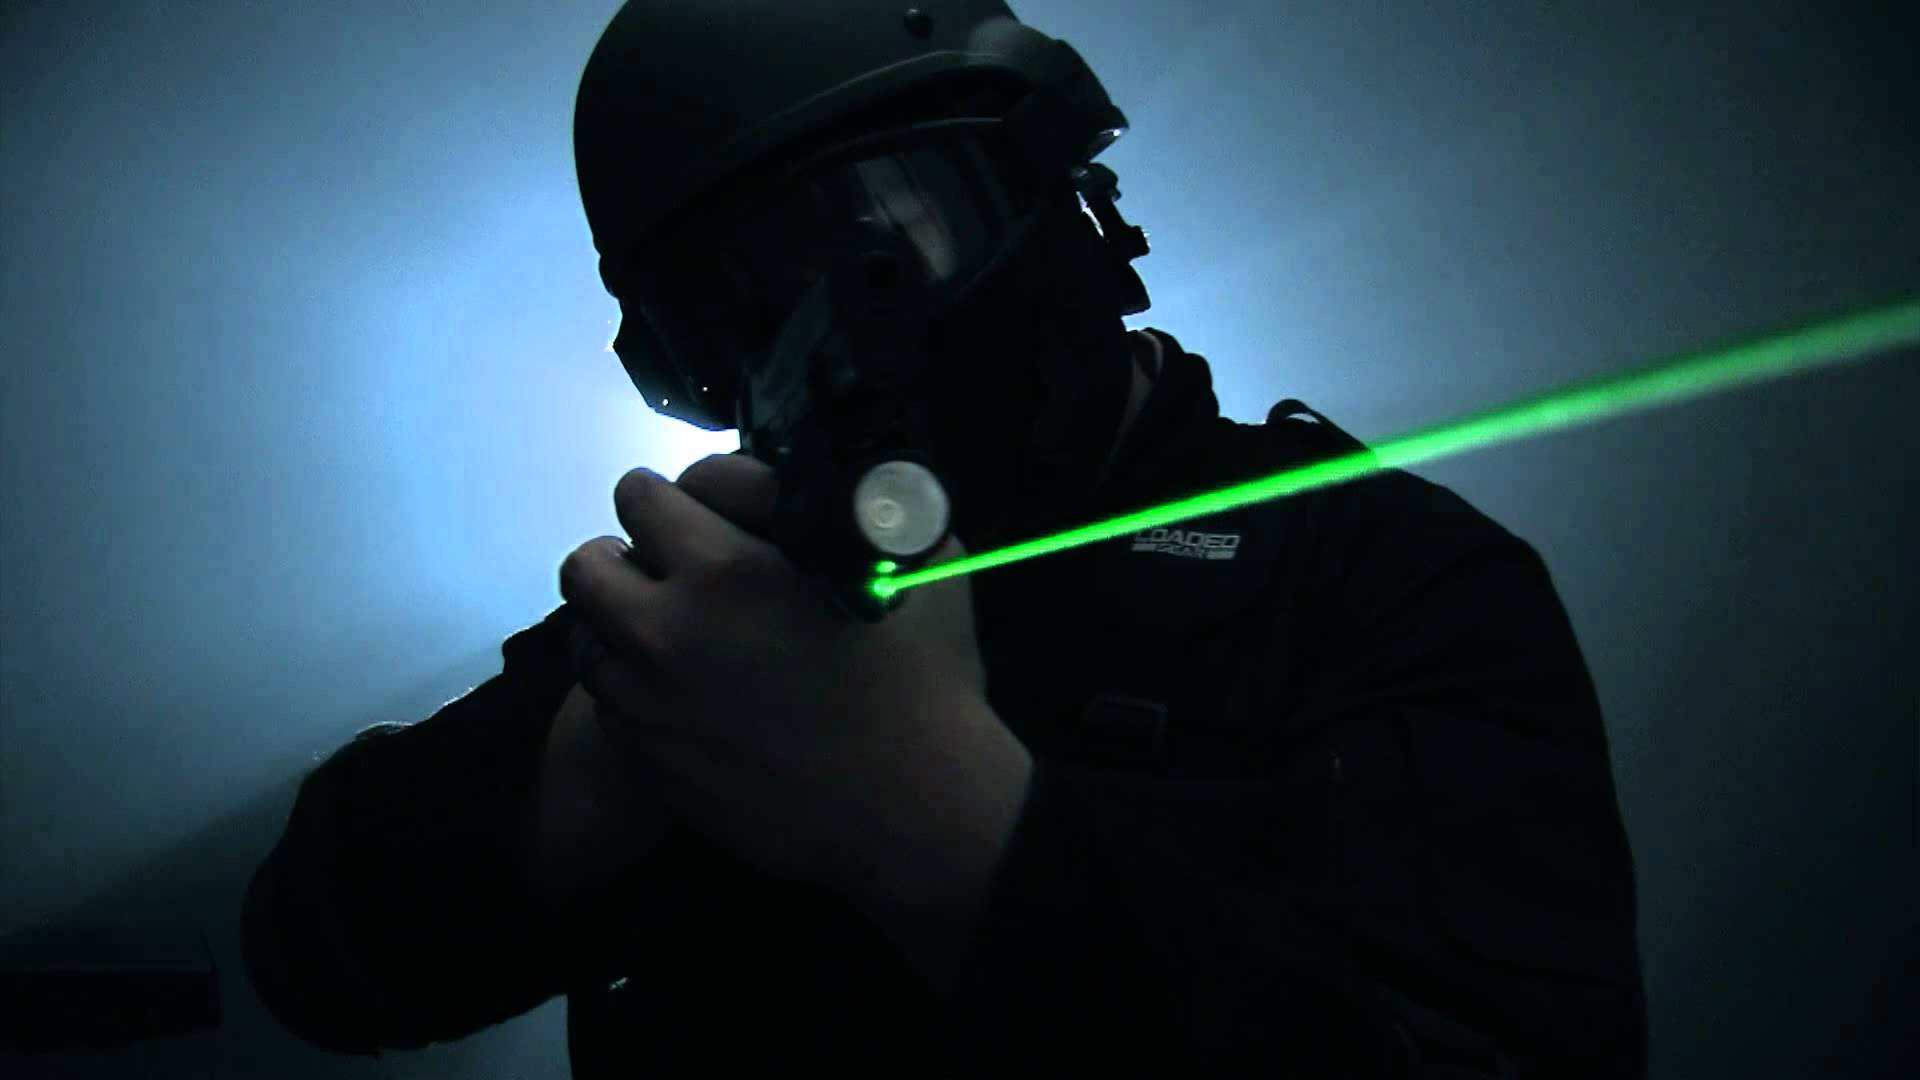 5 reasons why you need to add the CVLIFE Laser light to your handgun rifle